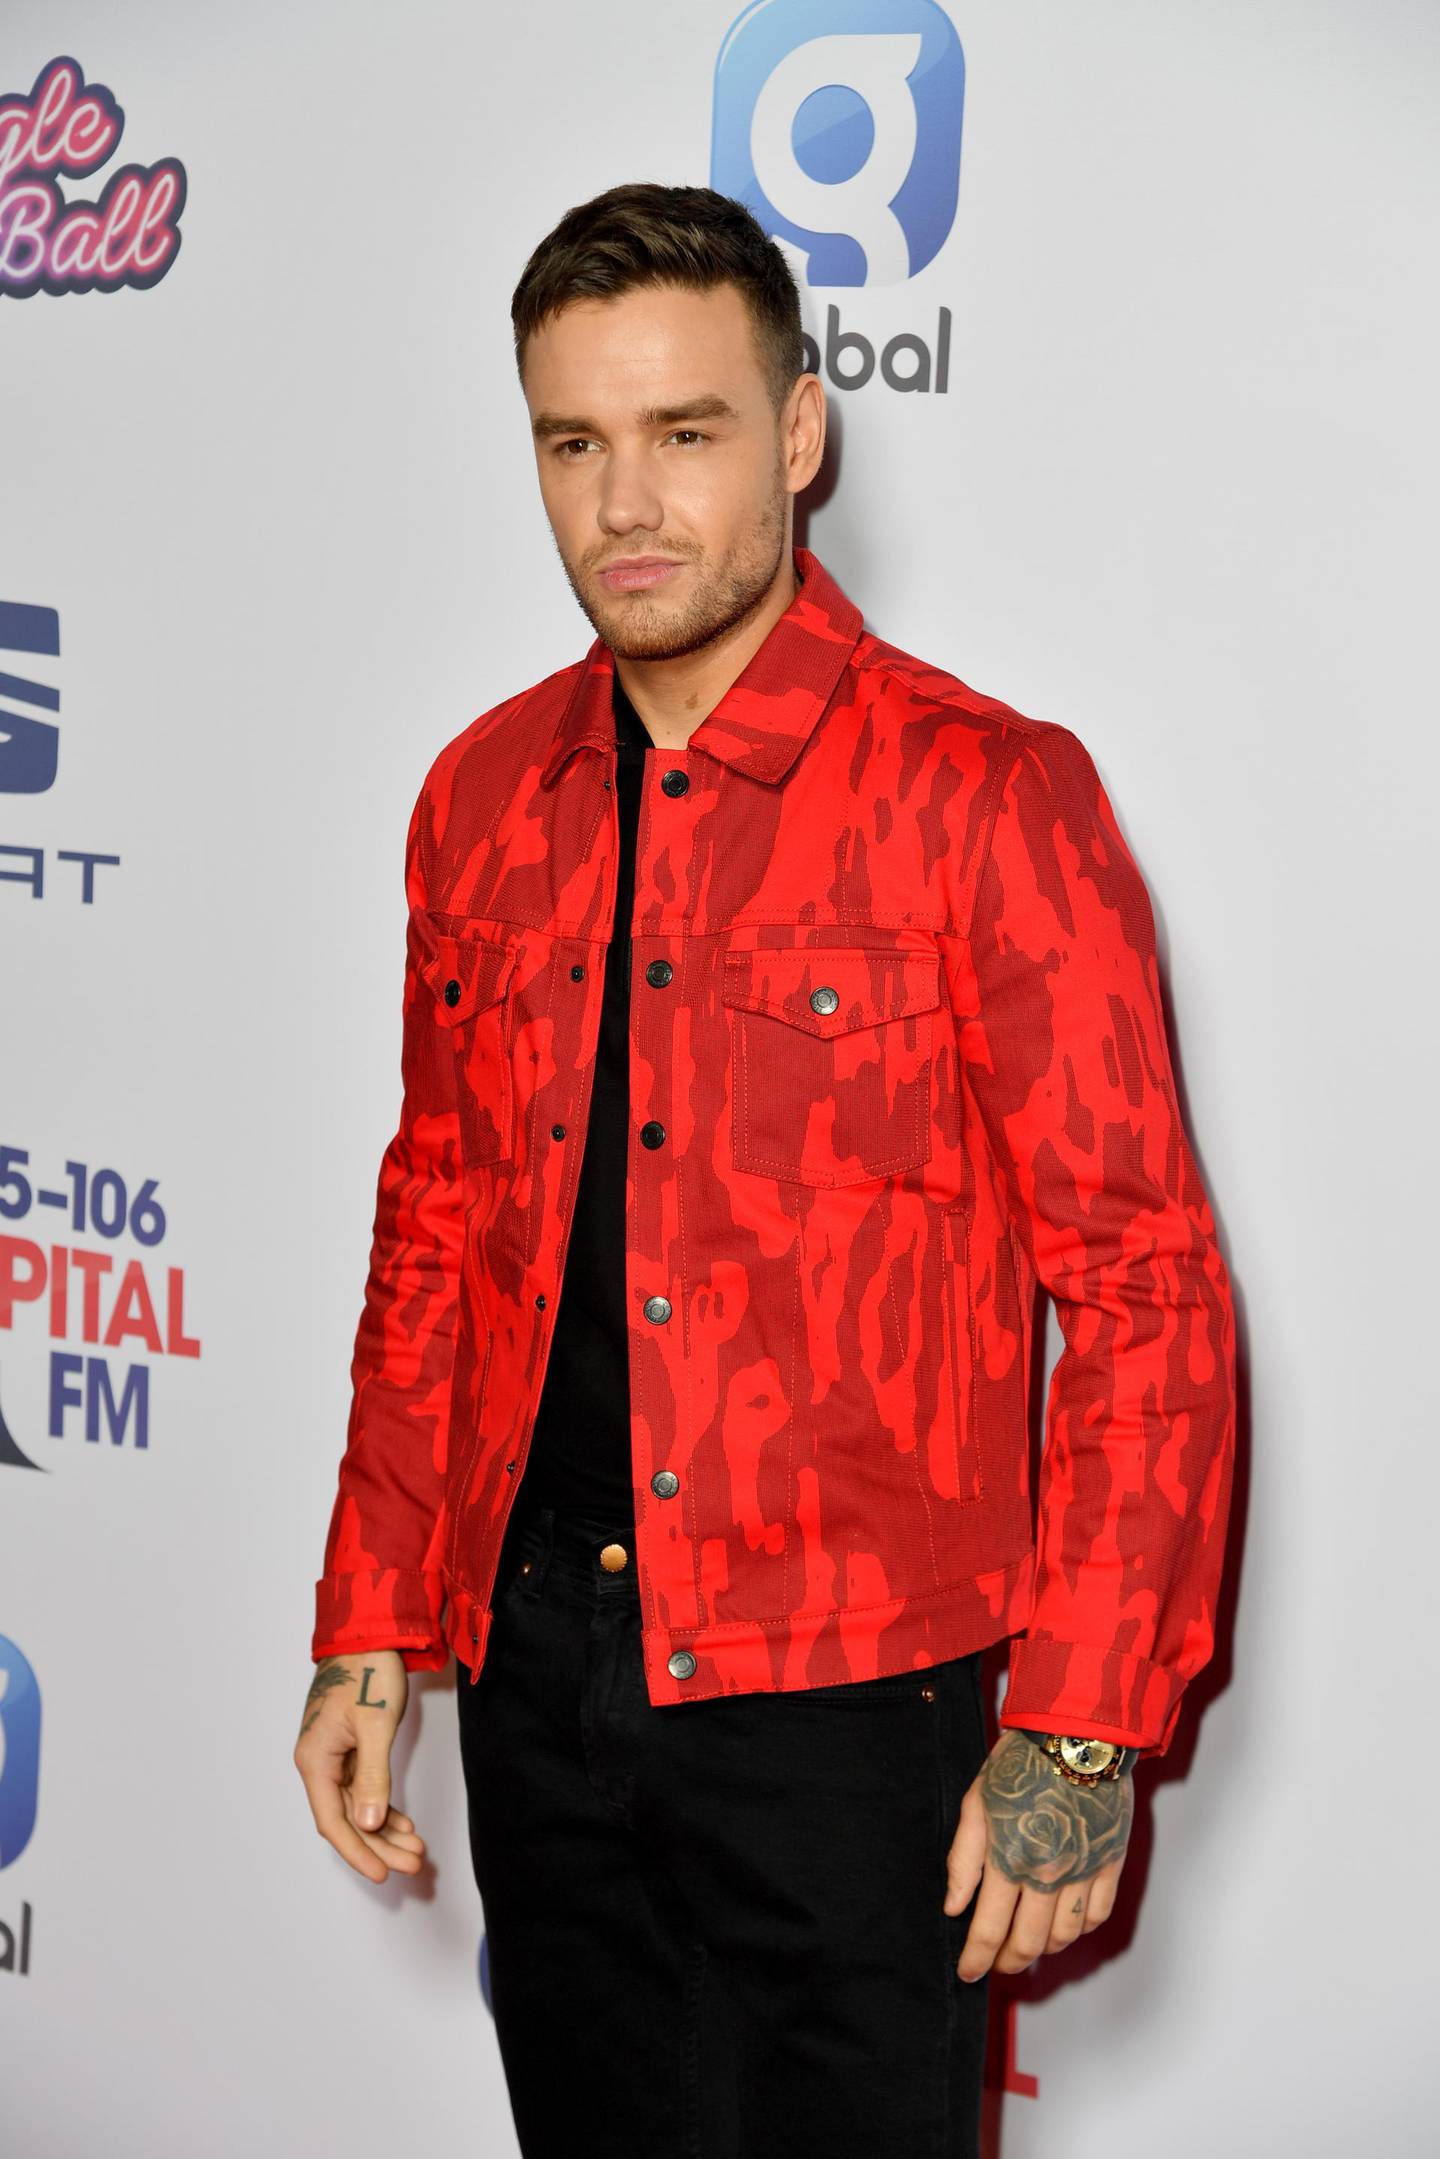 LONDON, ENGLAND - DECEMBER 07: Liam Payne attends Capital's Jingle Bell Ball 2019 with SEAT at The O2 Arena on December 07, 2019 in London, England. (Photo by Gareth Cattermole/Getty Images)